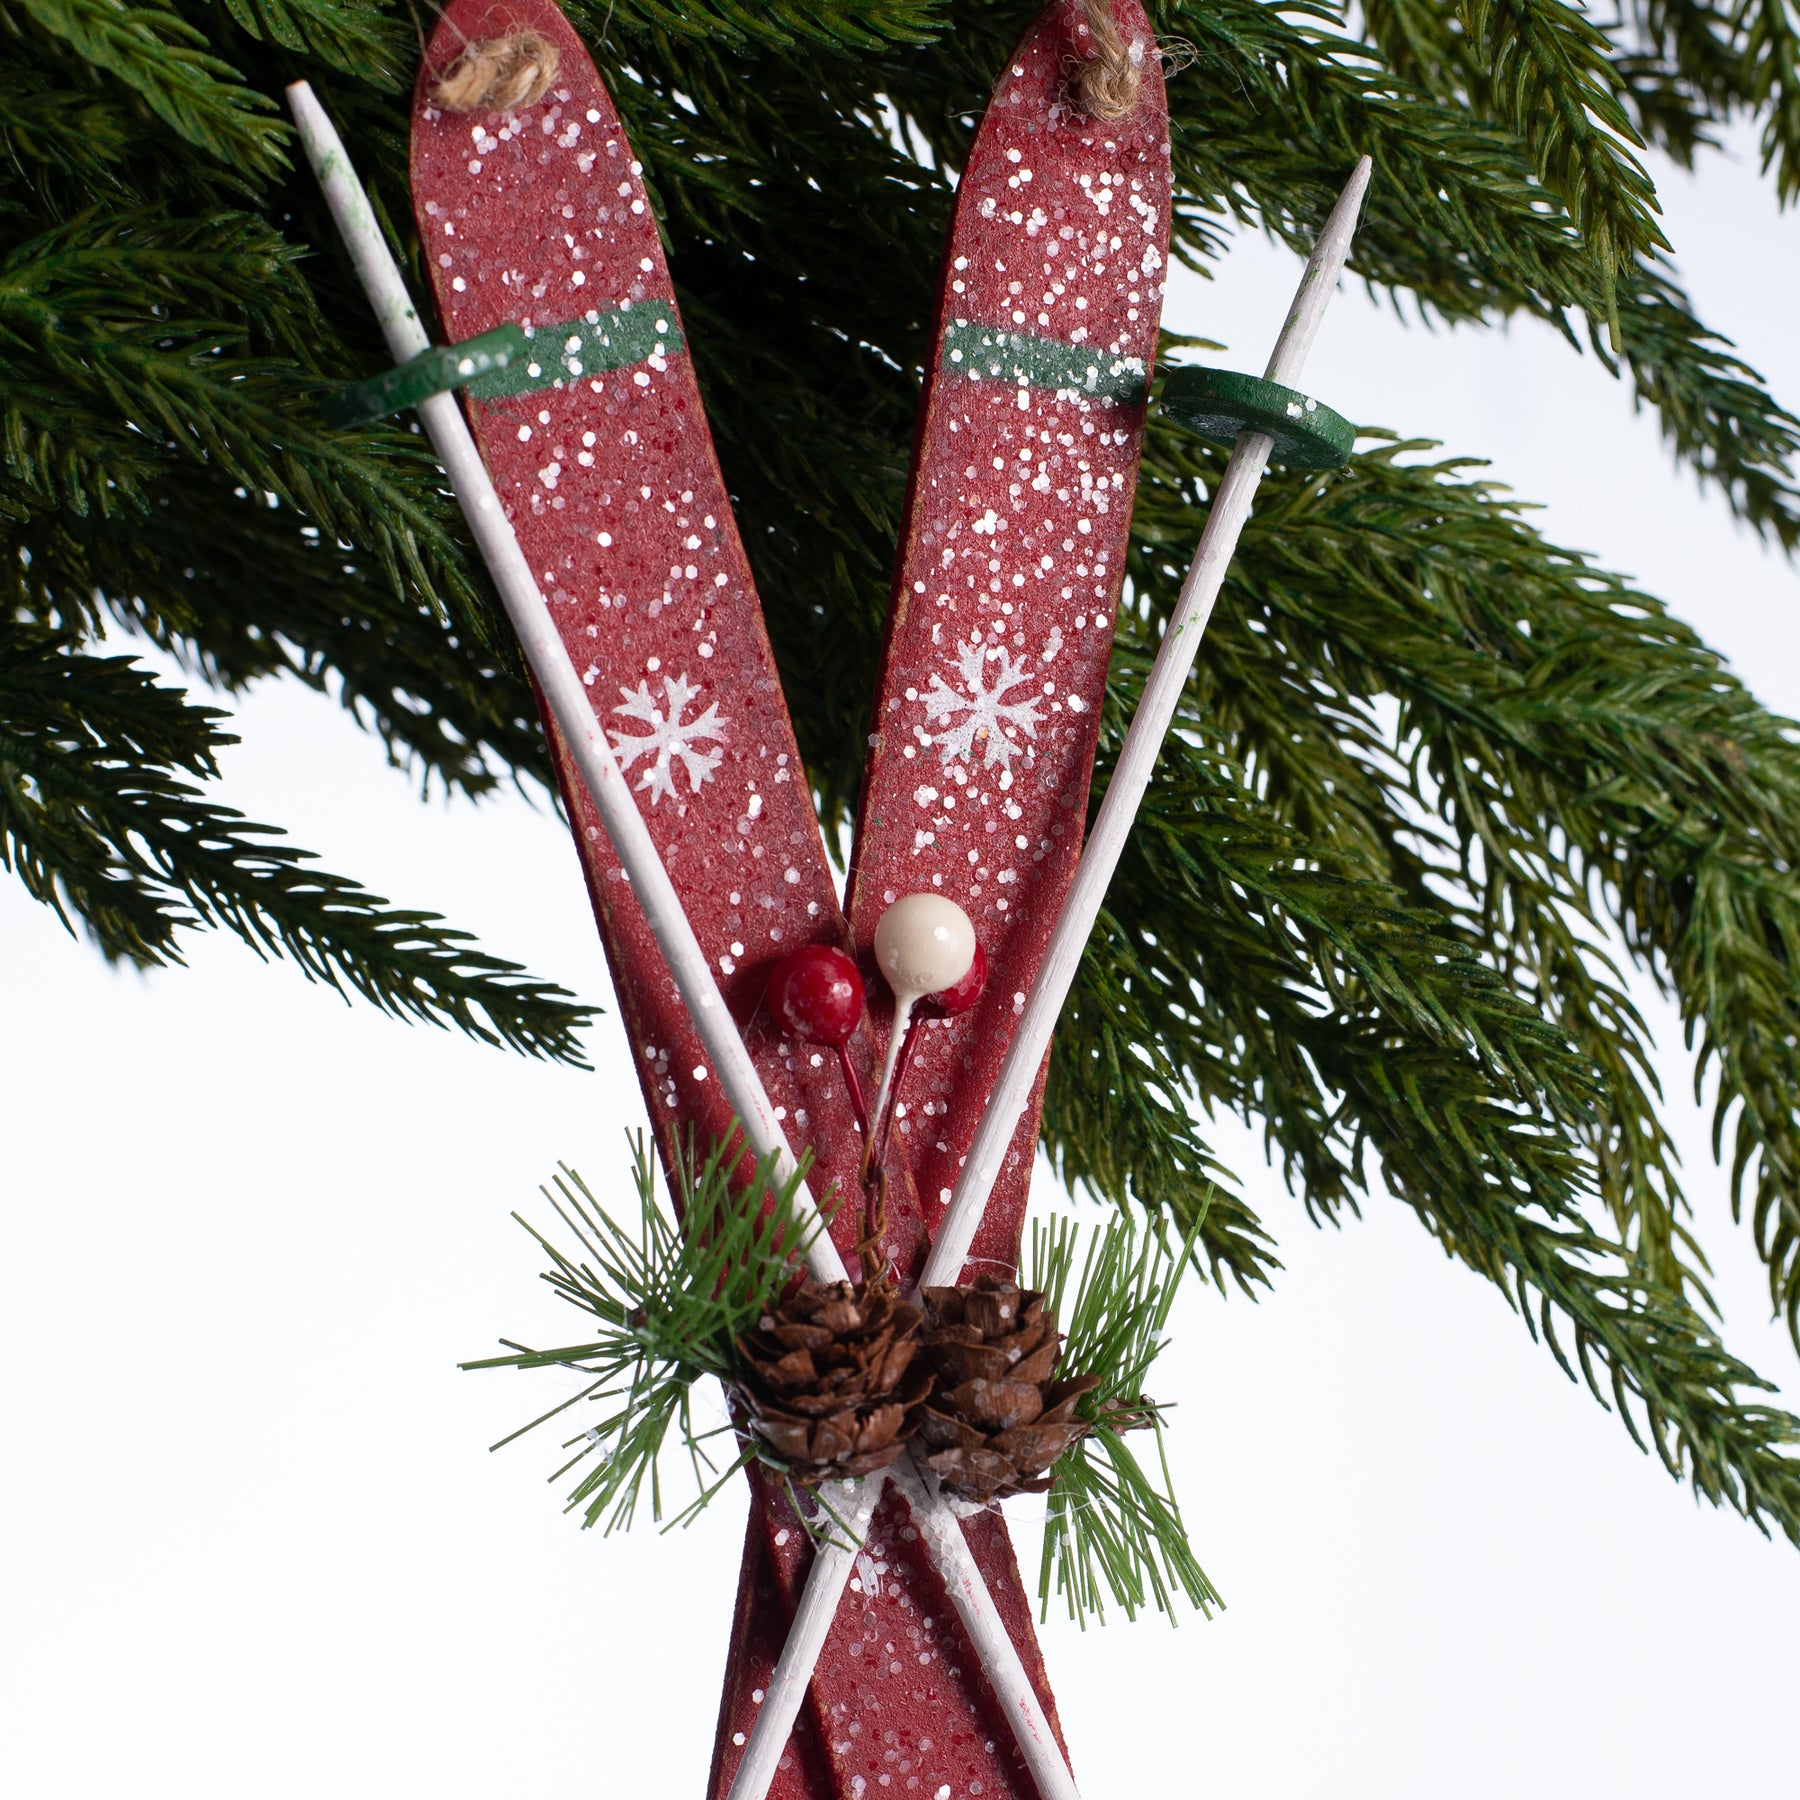 Glittered Snow Skis and Poles Classic Christmas Holiday Ornament ...